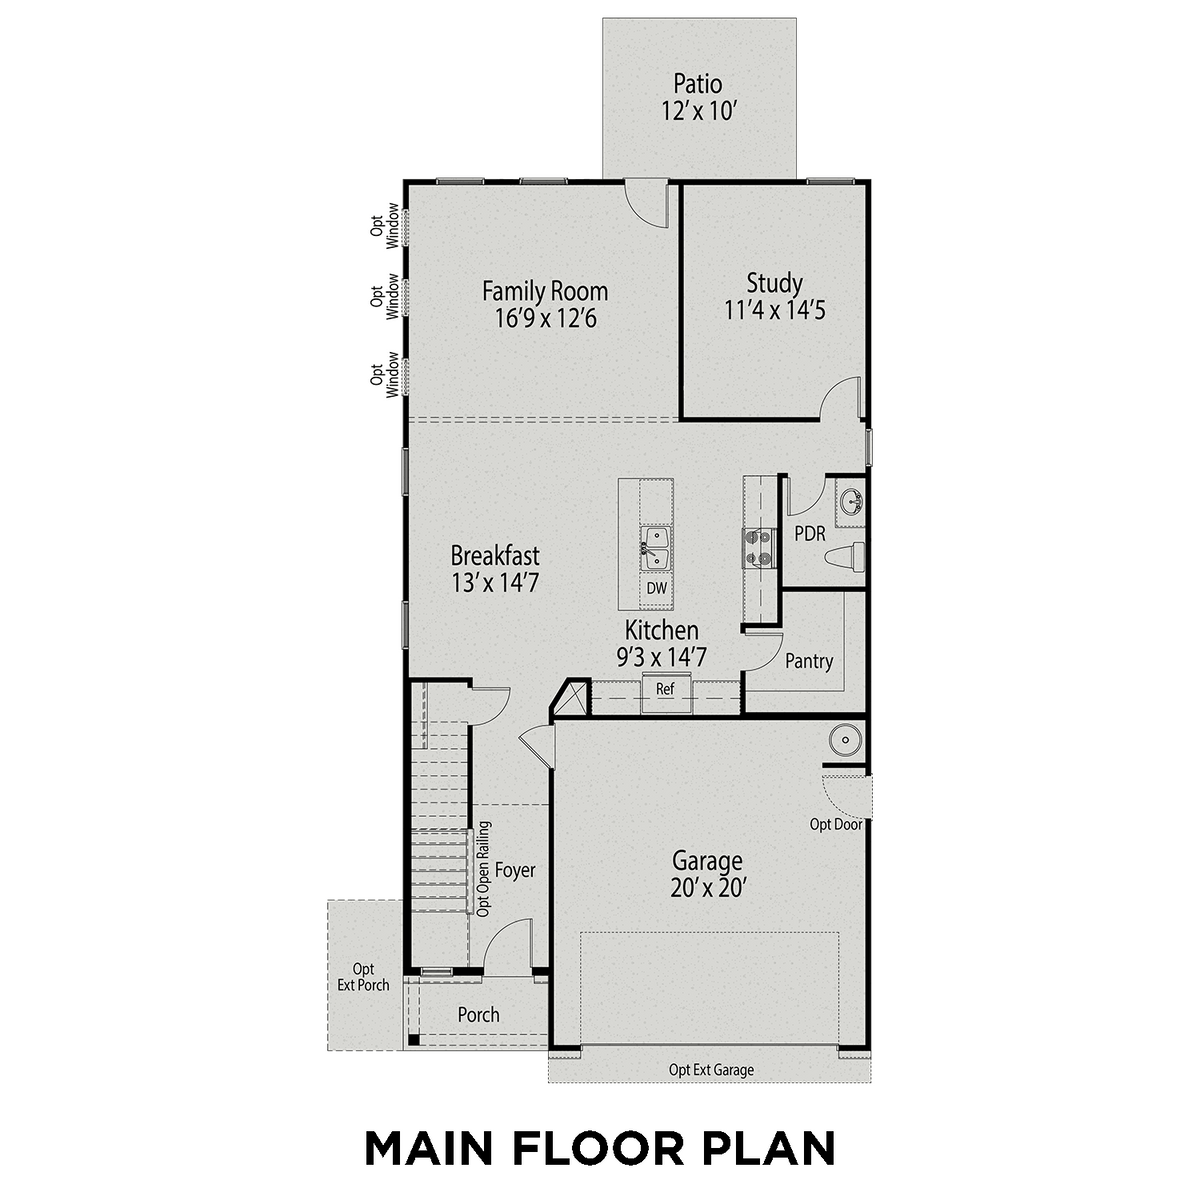 1 - The Adalynn A buildable floor plan layout in Davidson Homes' Gregory Village community.